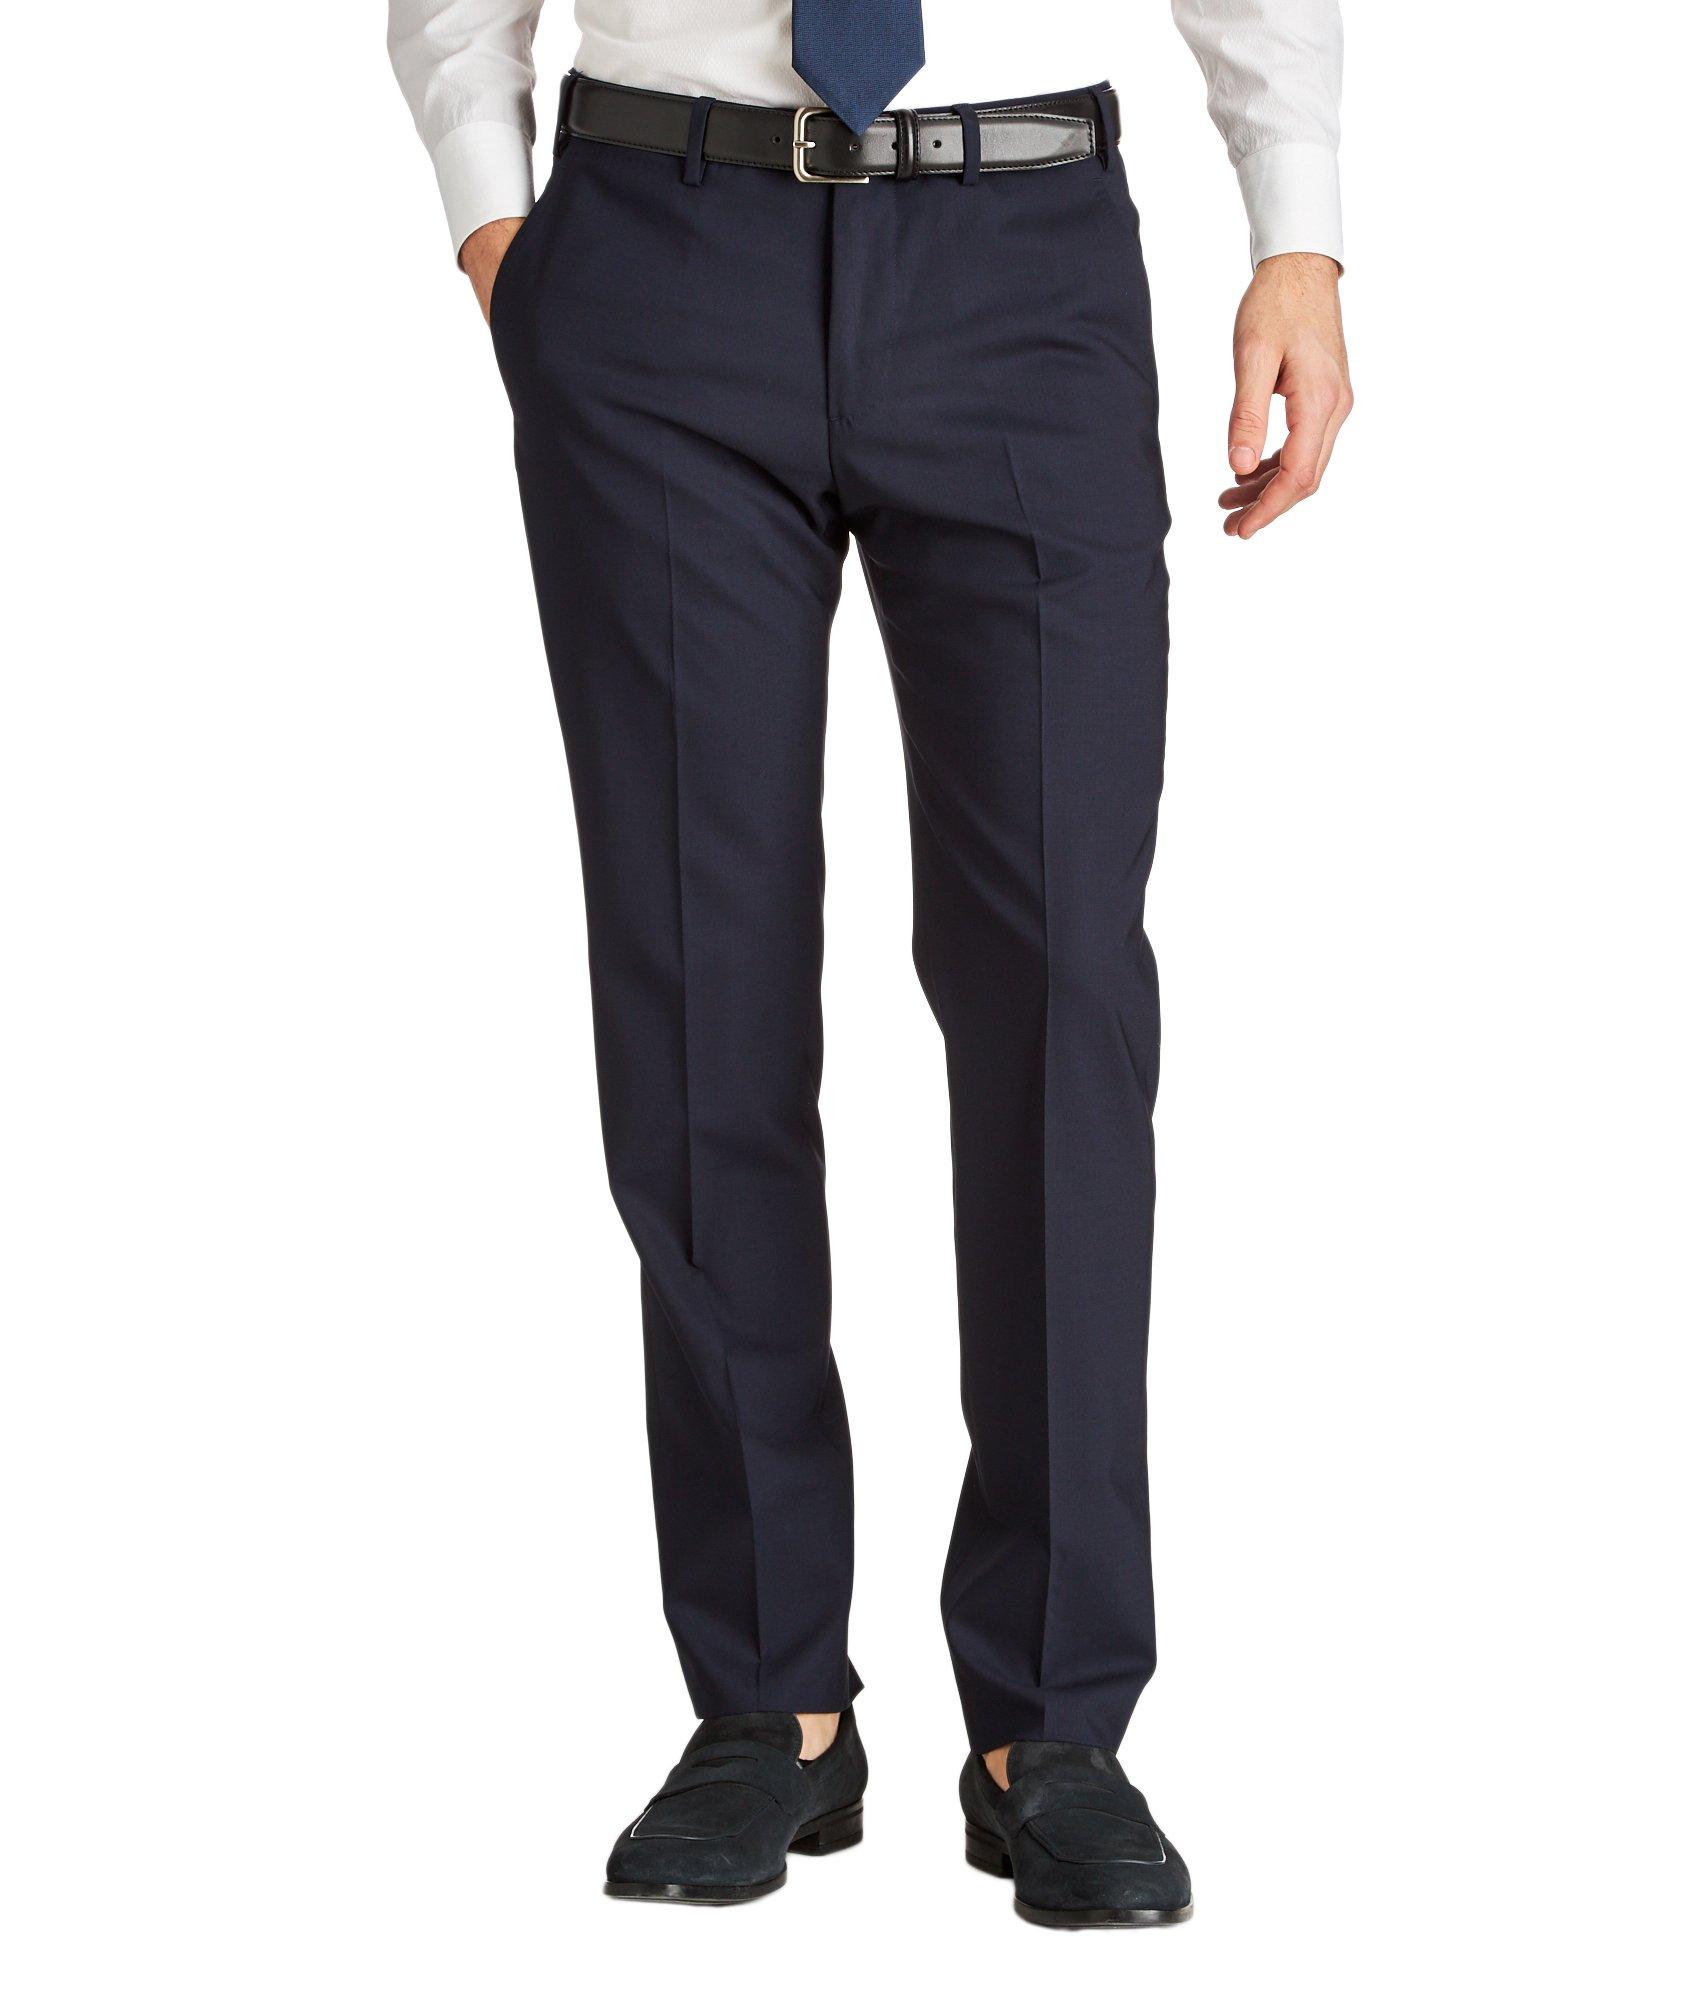 Stretch-Virgin Wool Trousers image 0